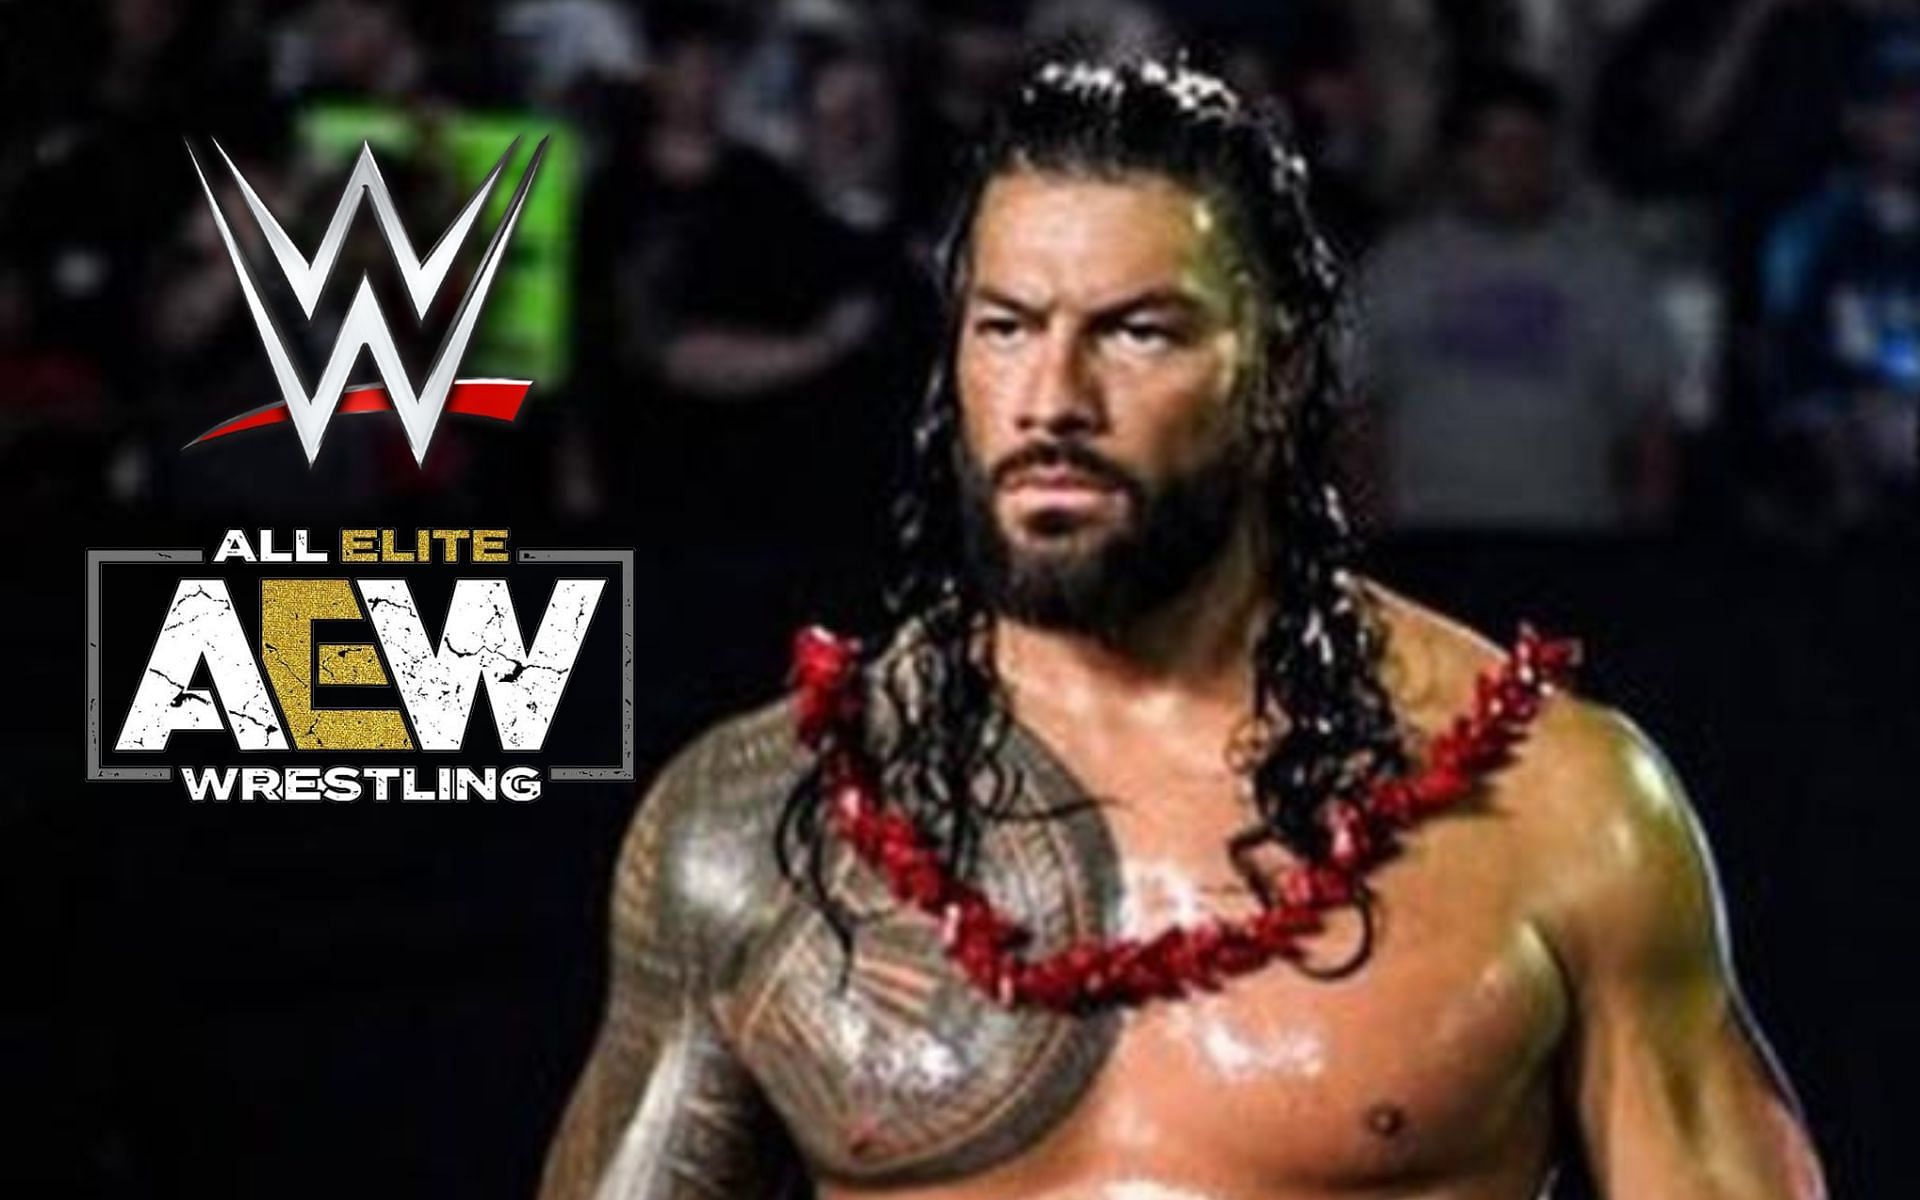 The Undisputed WWE Universal Champion Roman Reigns was once associated with AEW star.